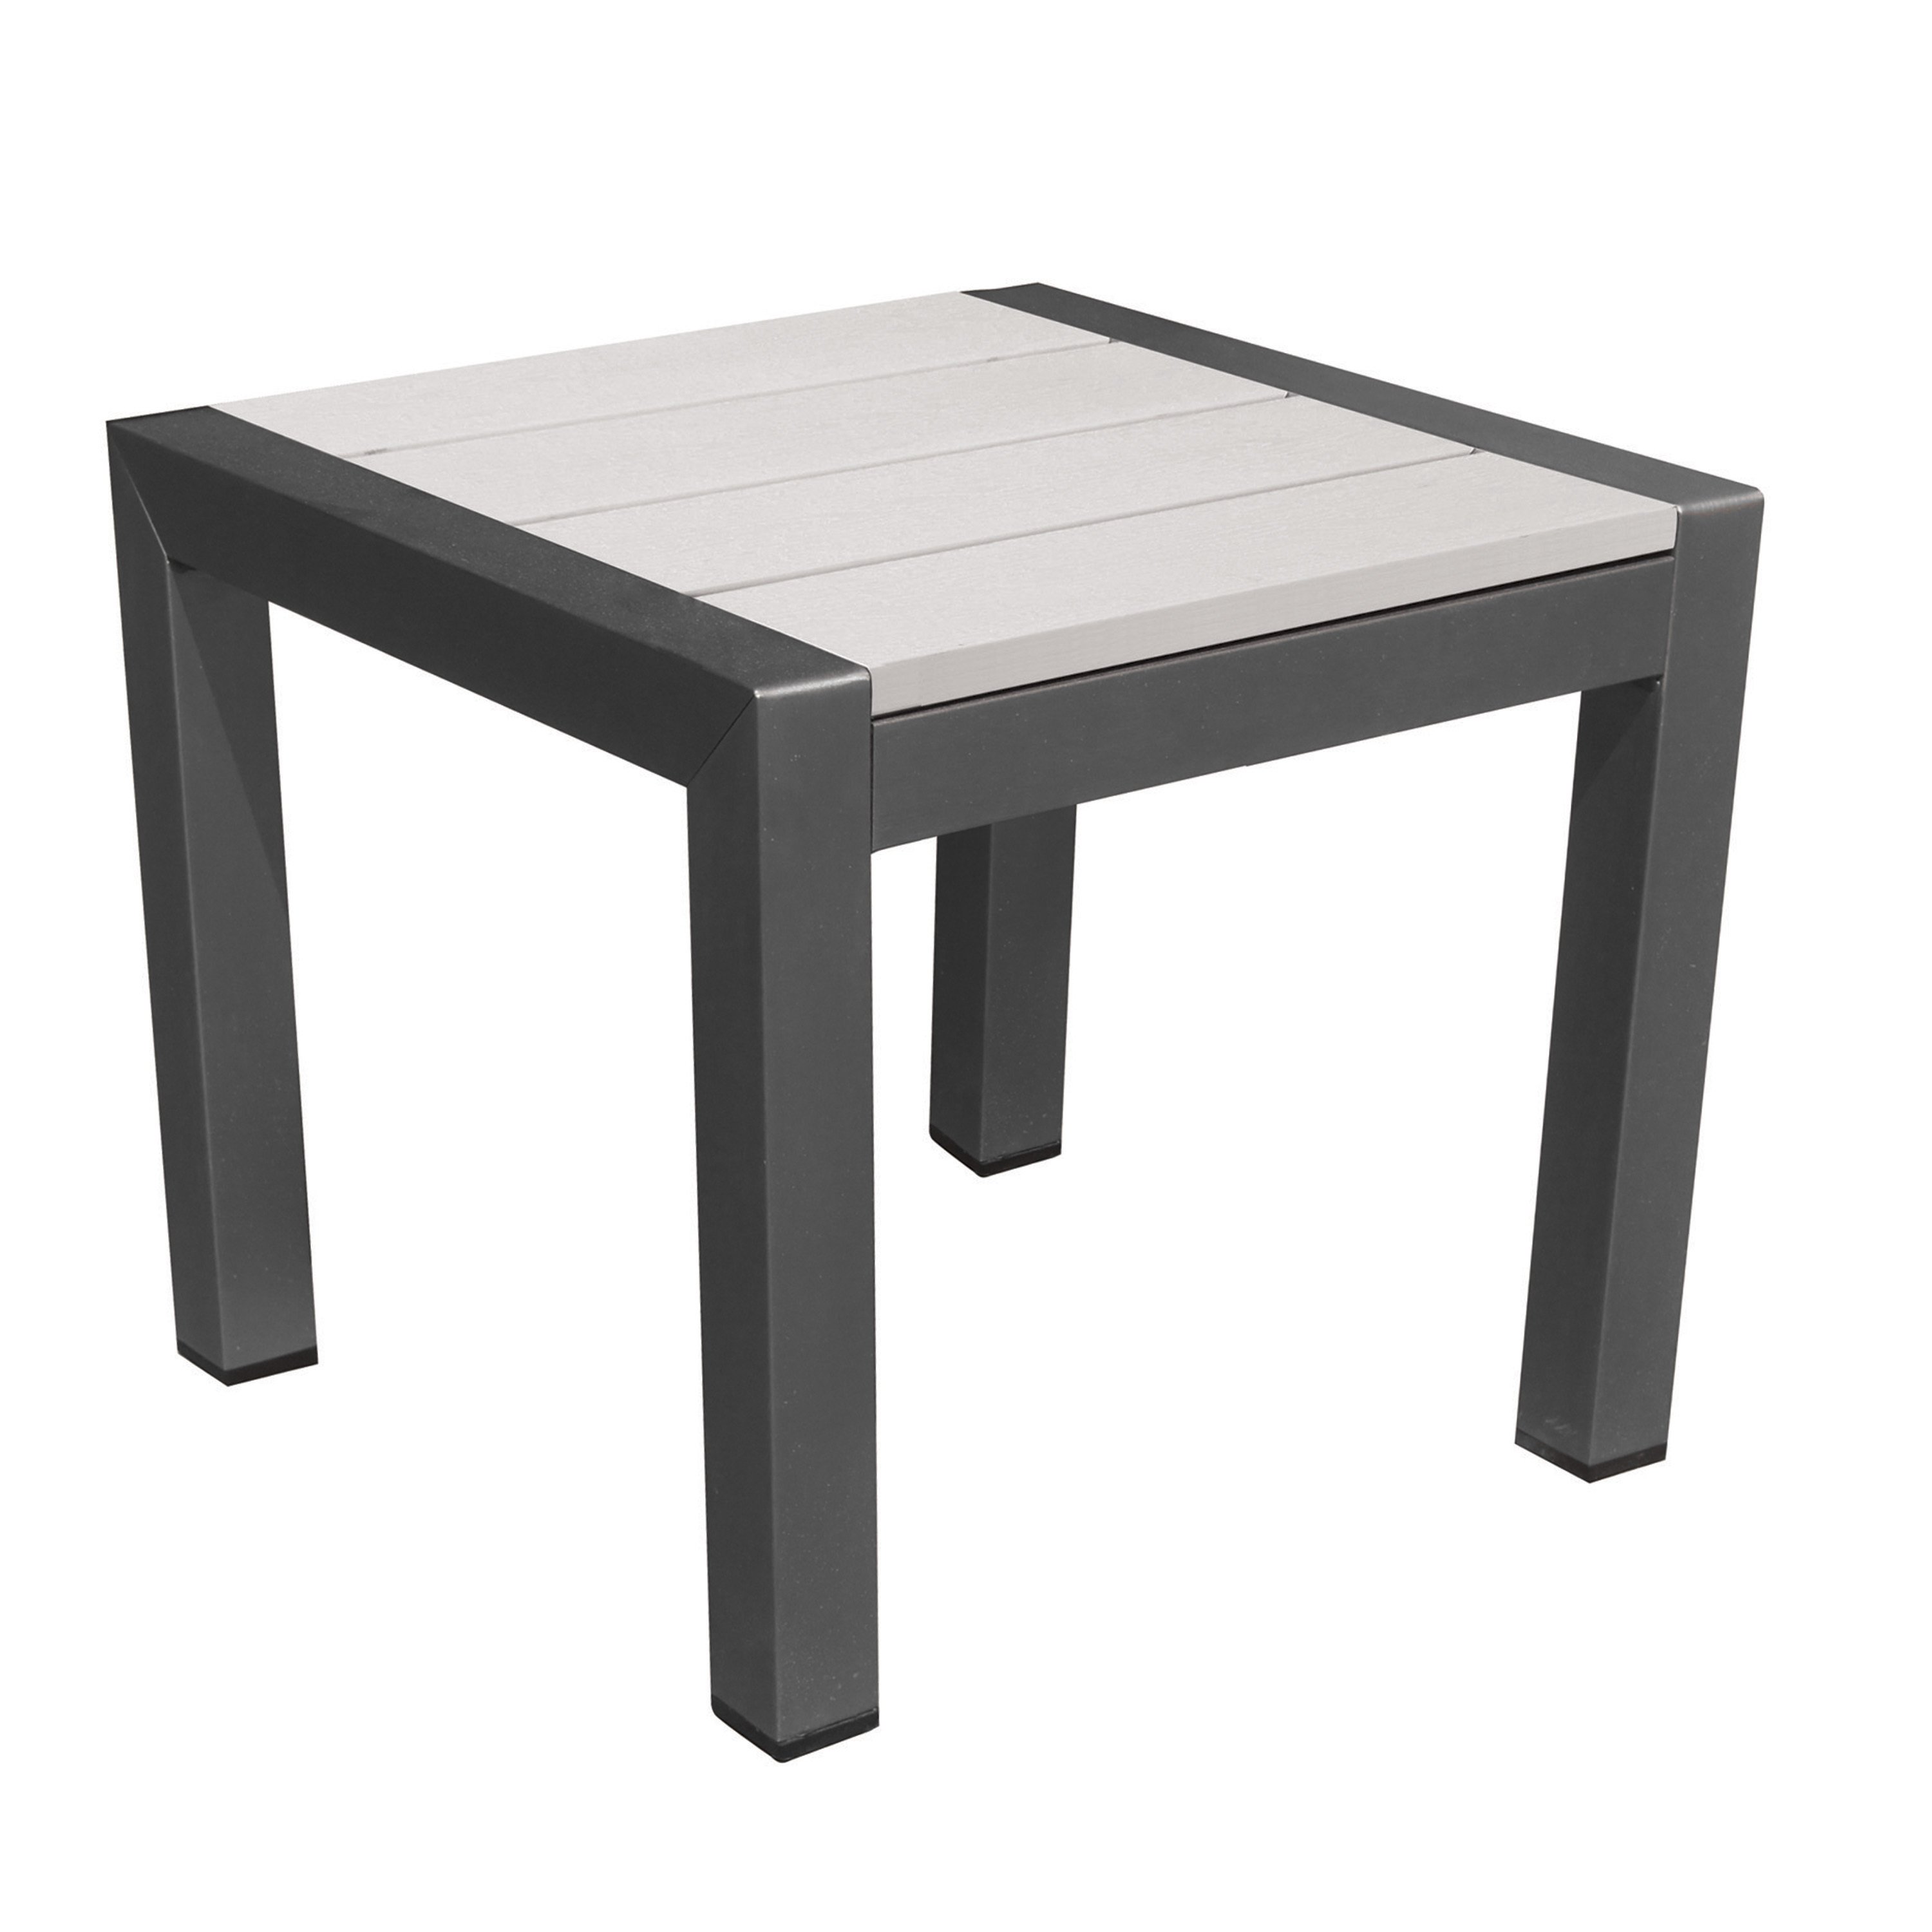 joseph outdoor side table free shipping today grey next mirrored small cabinet legs kohls bedspreads round oak end bistro tablecloth yellow area rug metal and glass tables marble